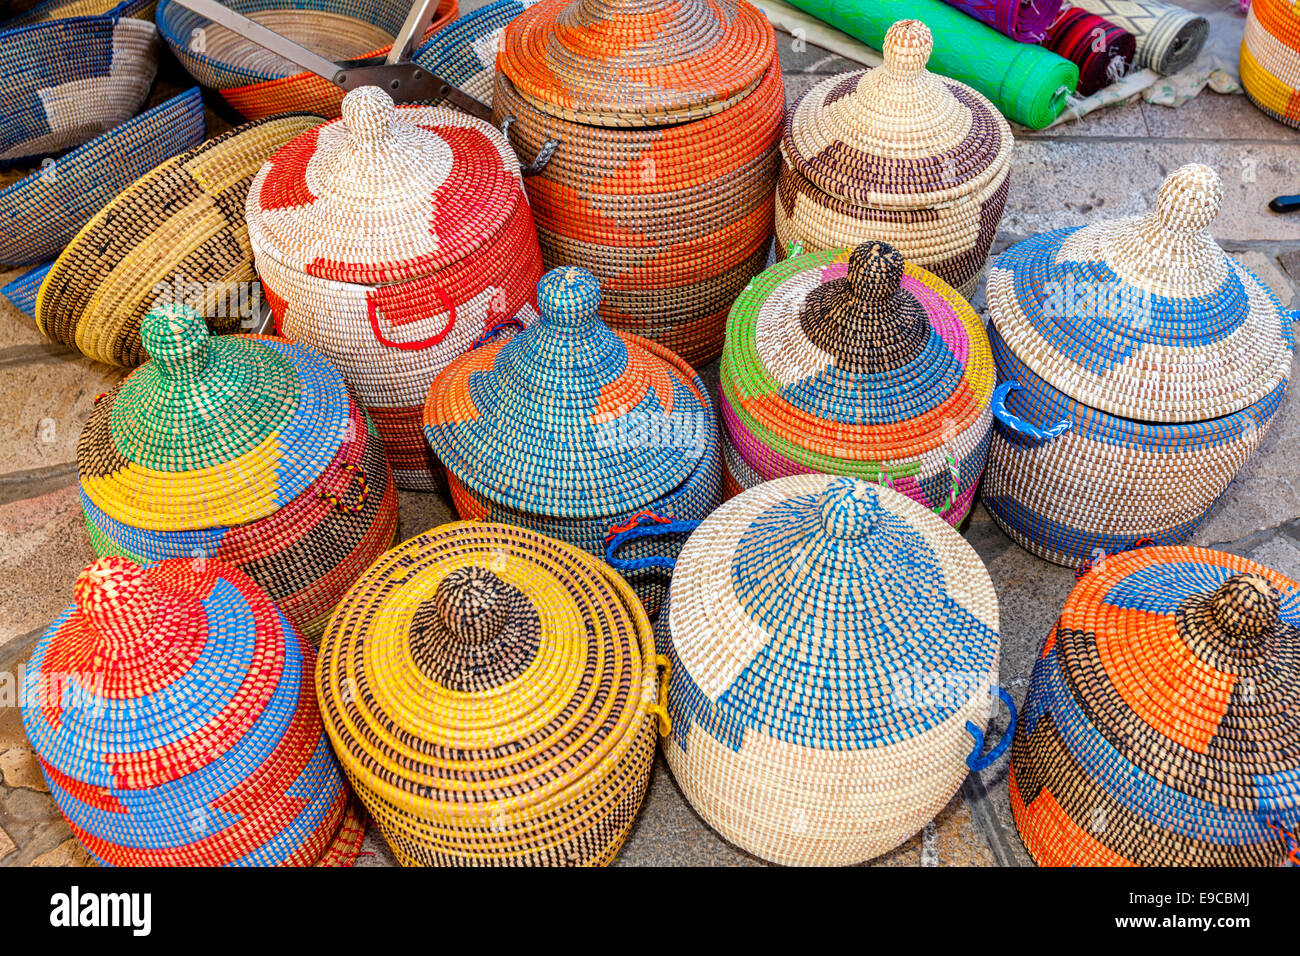 Colourful Baskets For Sale At The Thursday Market In Inca, Mallorca - Spain  Stock Photo - Alamy